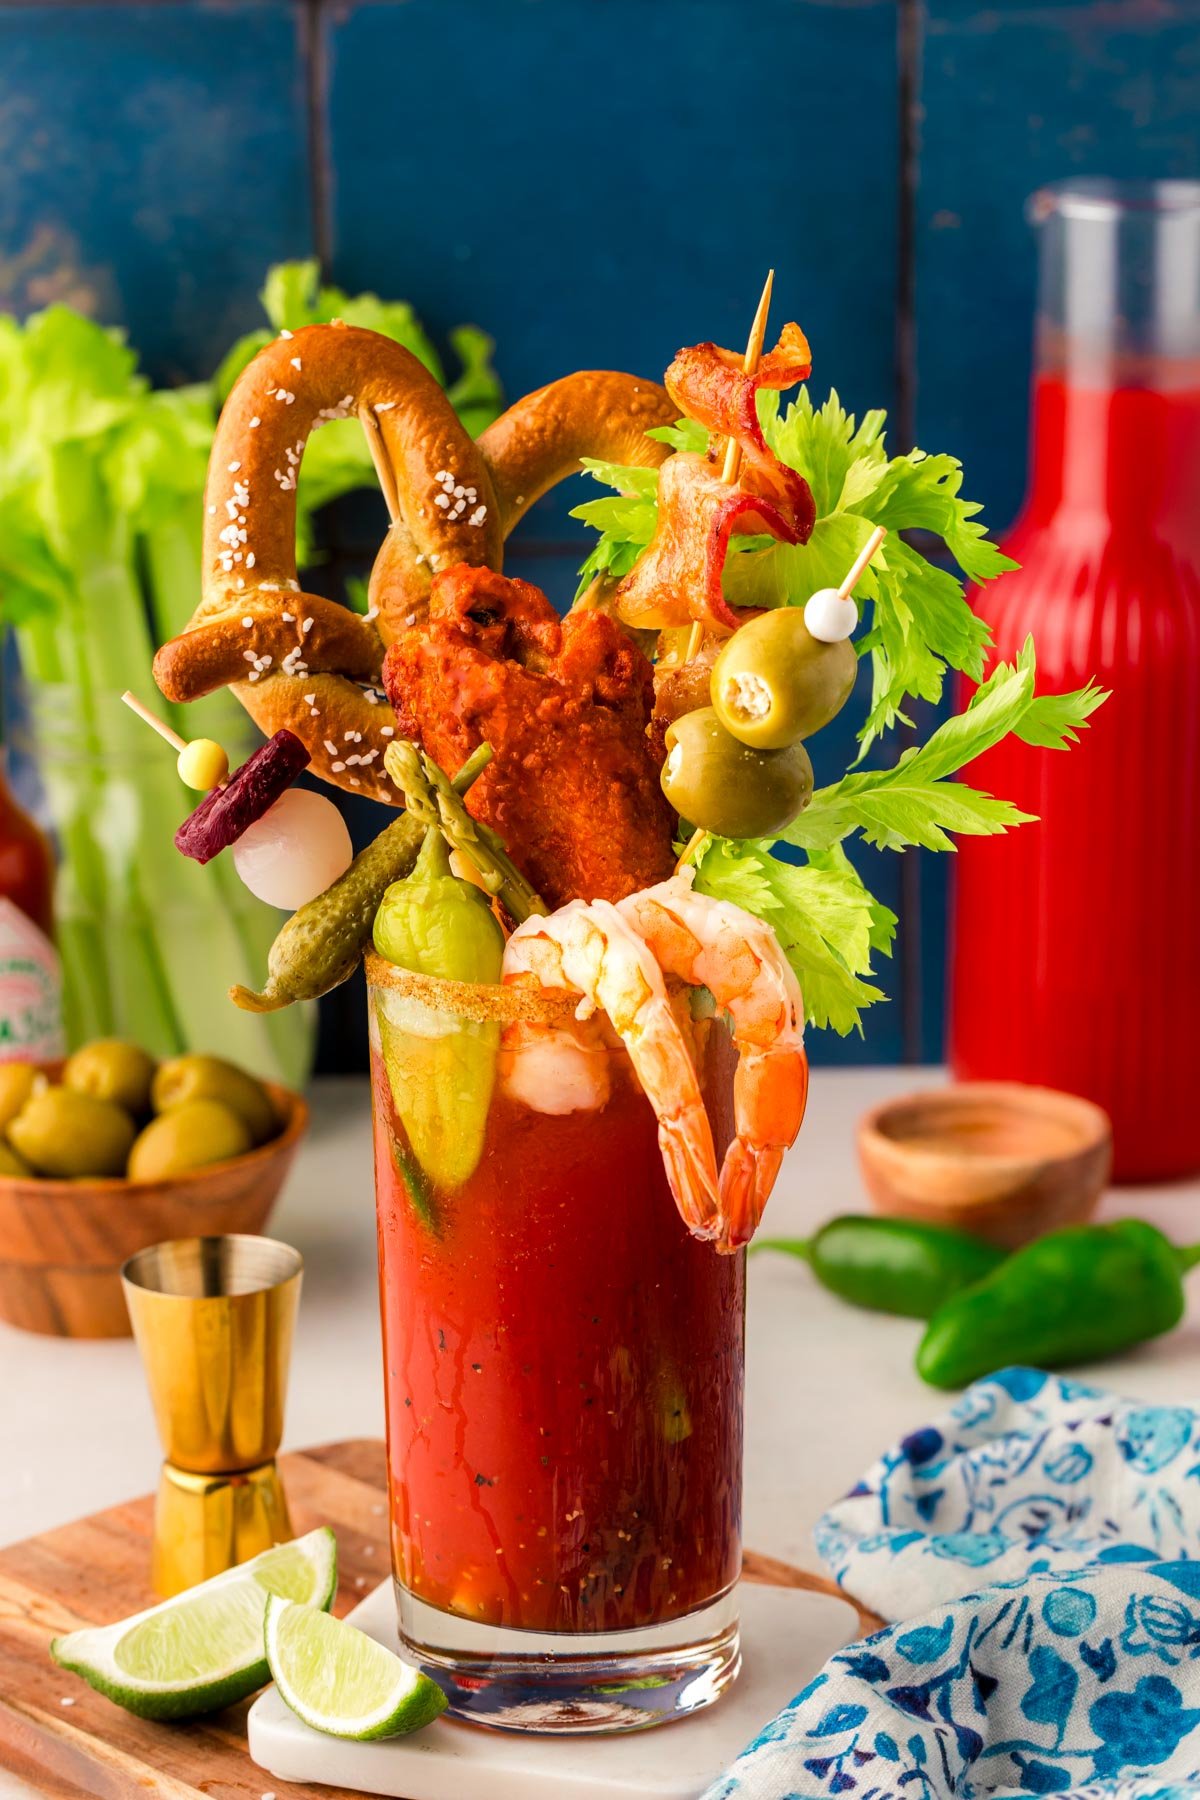 Bloody Mary with big savory garnishes.